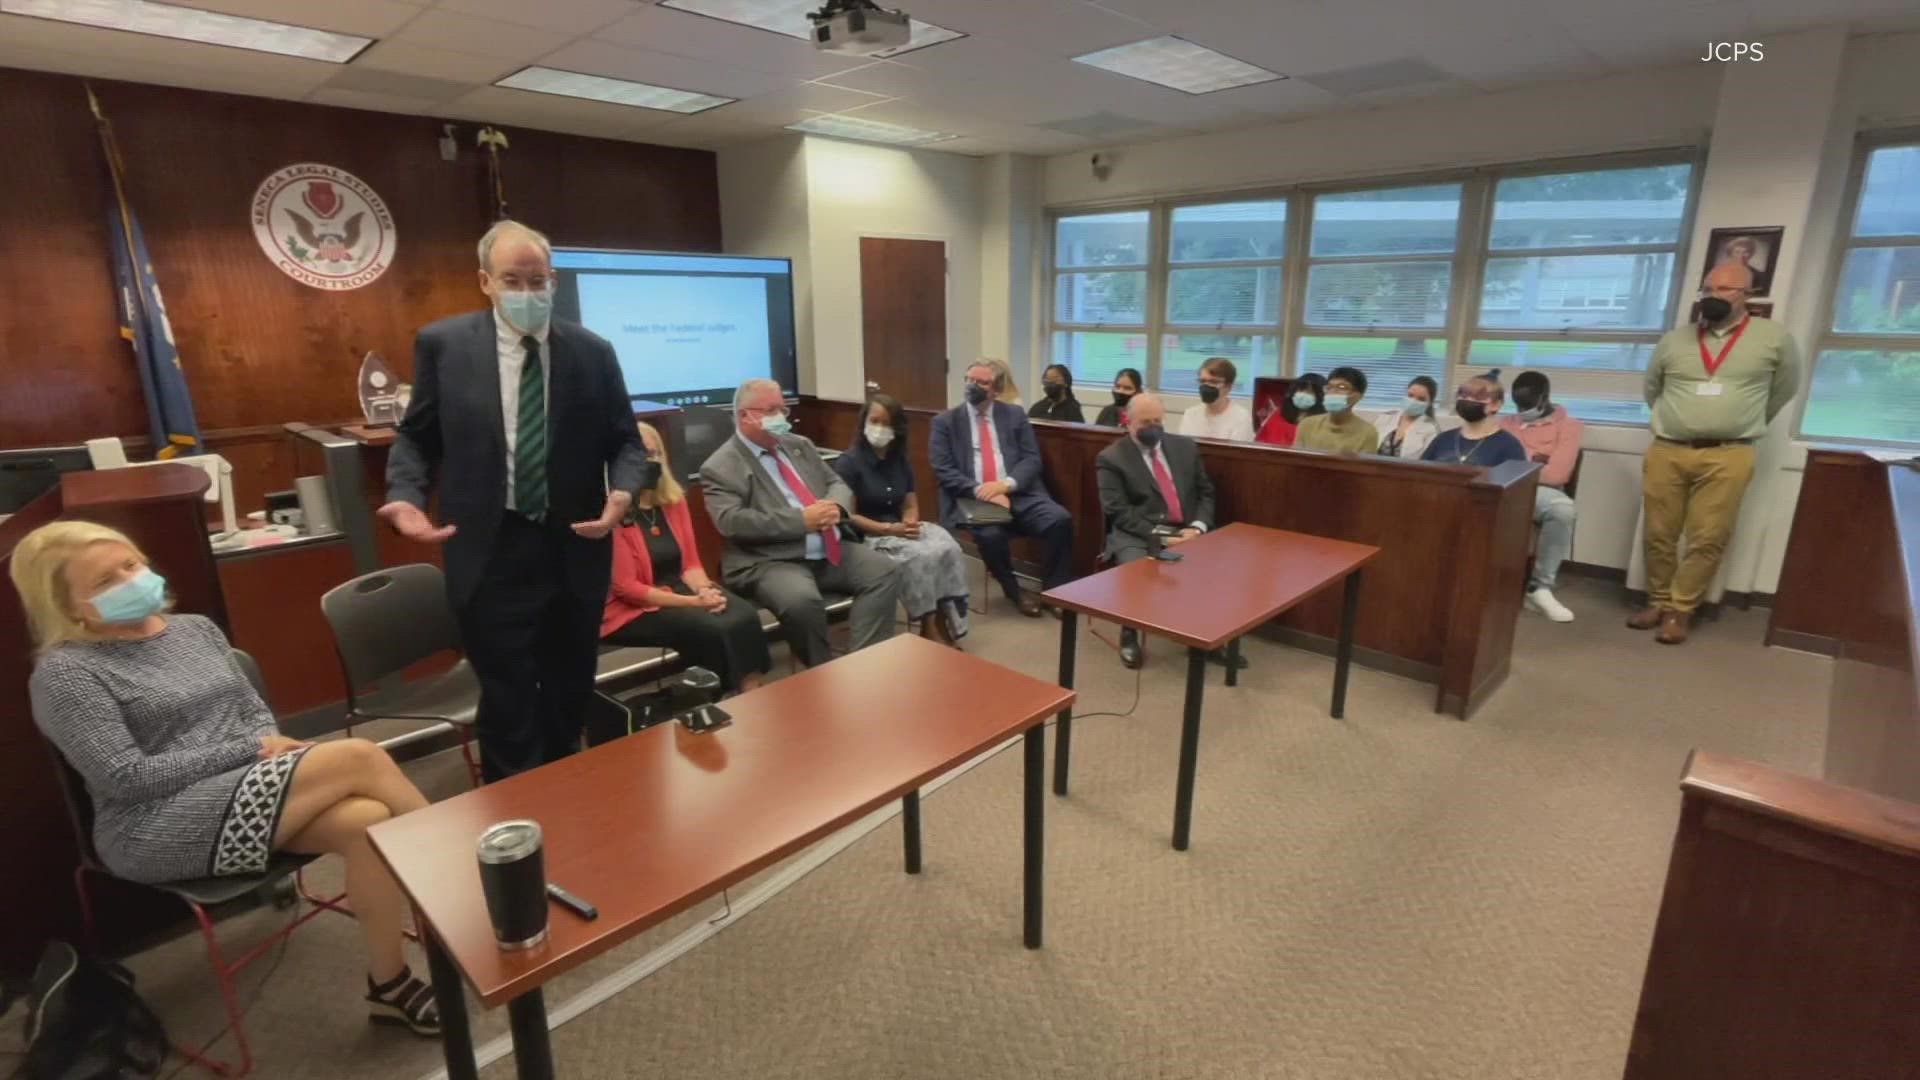 Seven judges from the United States Sixth Circuit Court of Appeals were in Louisville Tuesday, and they stopped by some high schools to share their experiences.